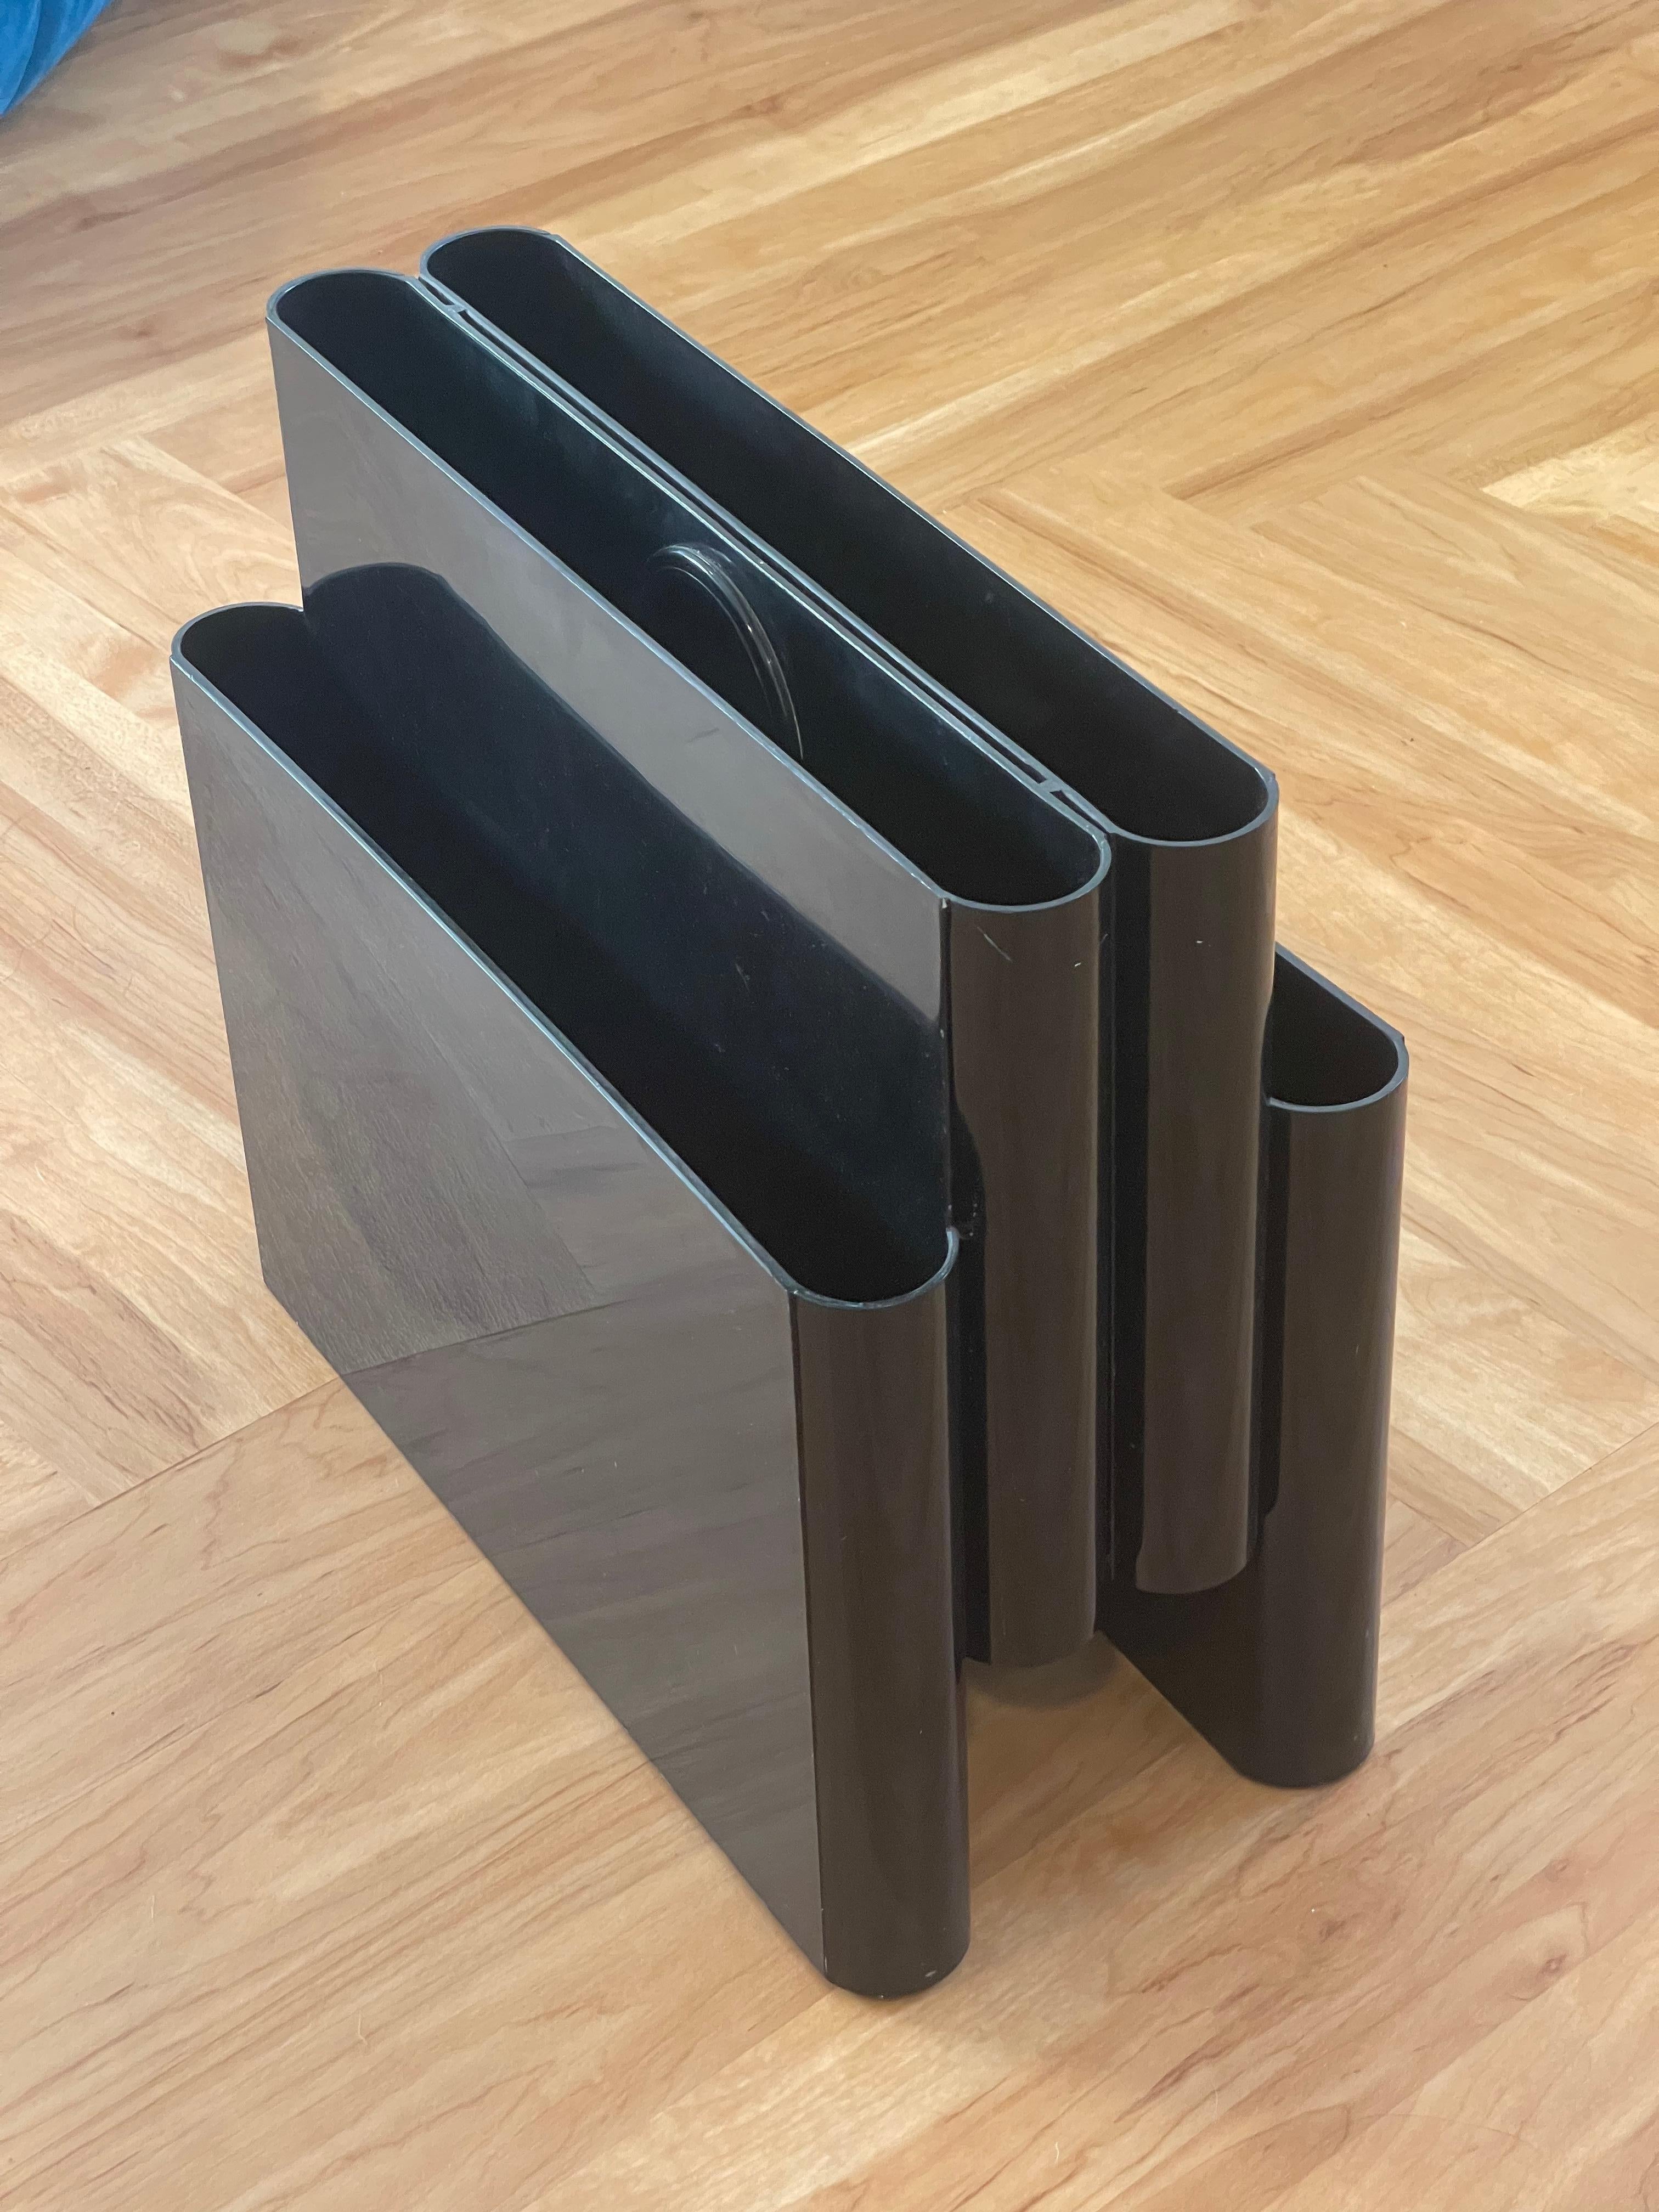 2-tier Portarviste magazine rack in black by Giotto Stoppino for Kartell, 1971. Slight wear consistent with age. Signed Kartell.